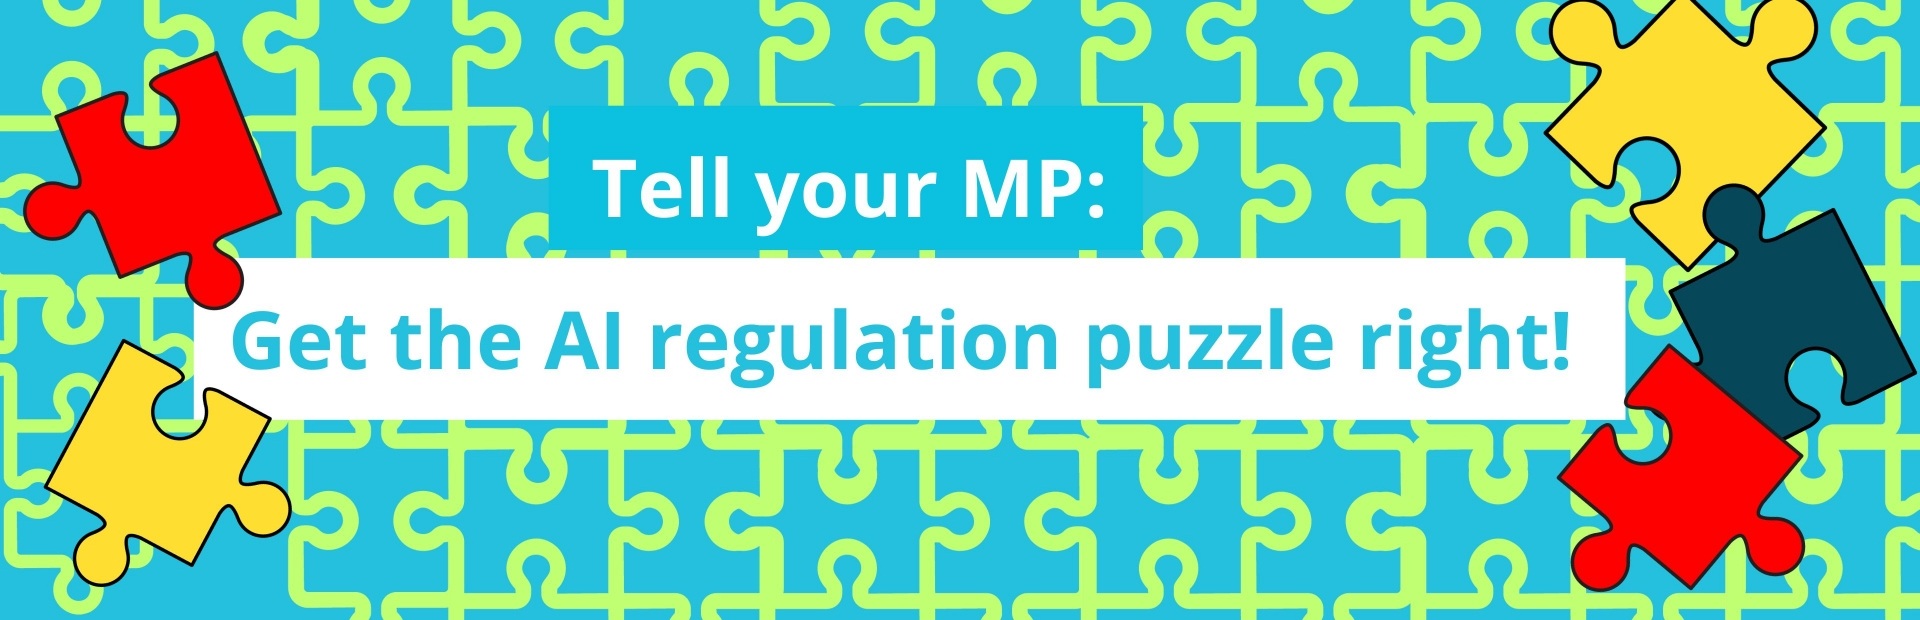 Tell your MP: Get the AI regulation puzzle right!